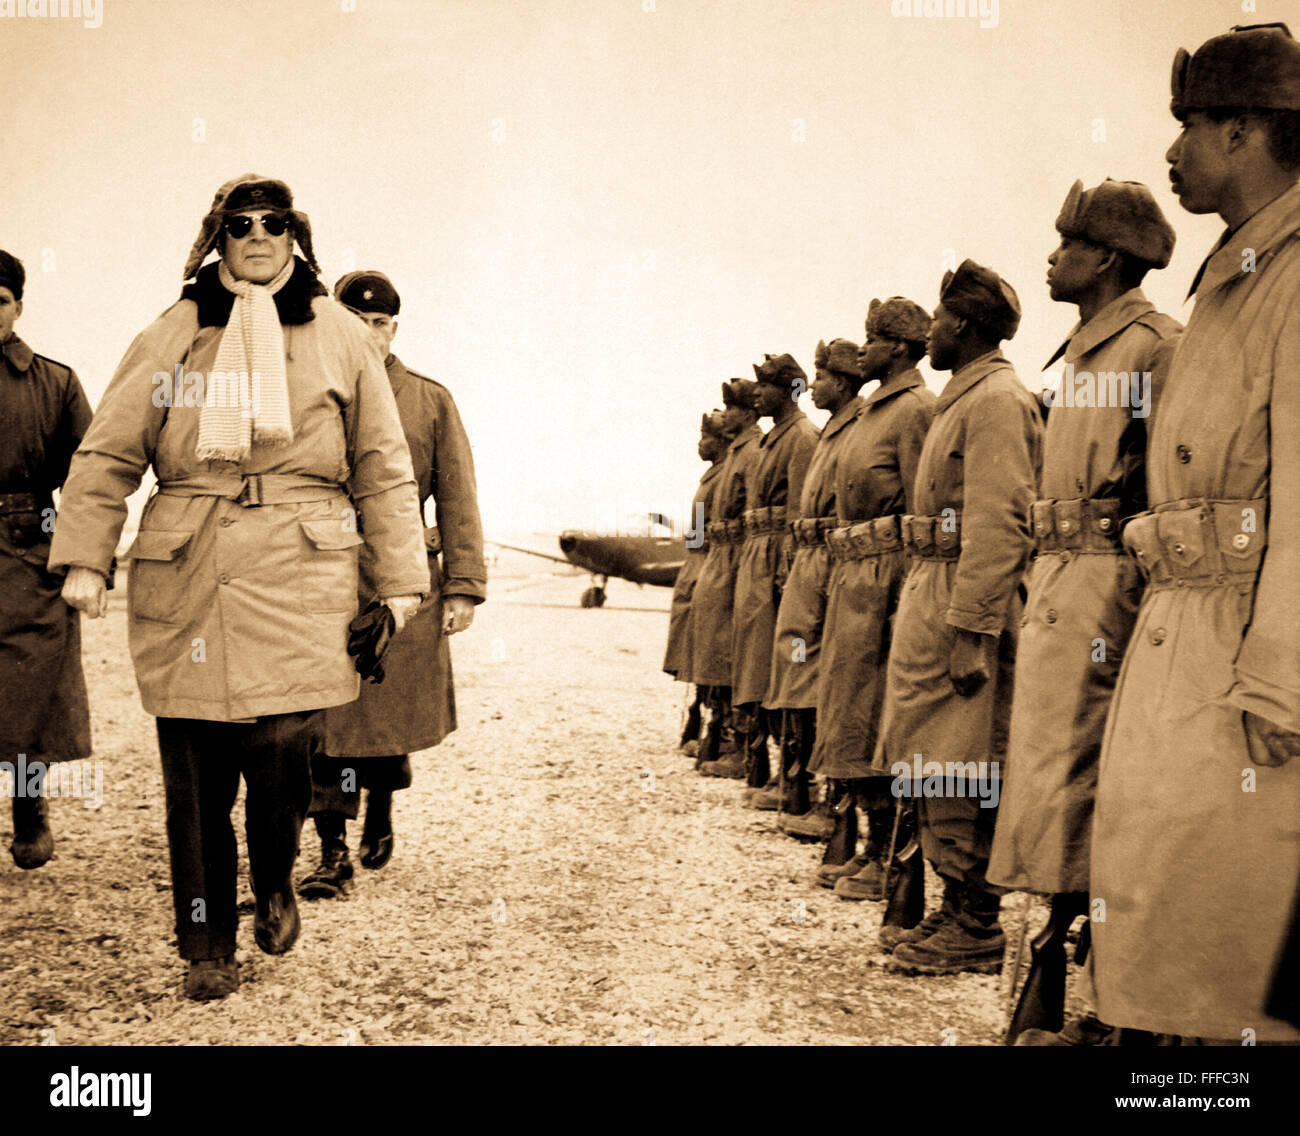 General of the Army Douglas MacArthur is shown inspecting troops of the 24th Inf. on his arrival at Kimpo airfield for a tour of the battlefront.  February 21, 1951. Stock Photo